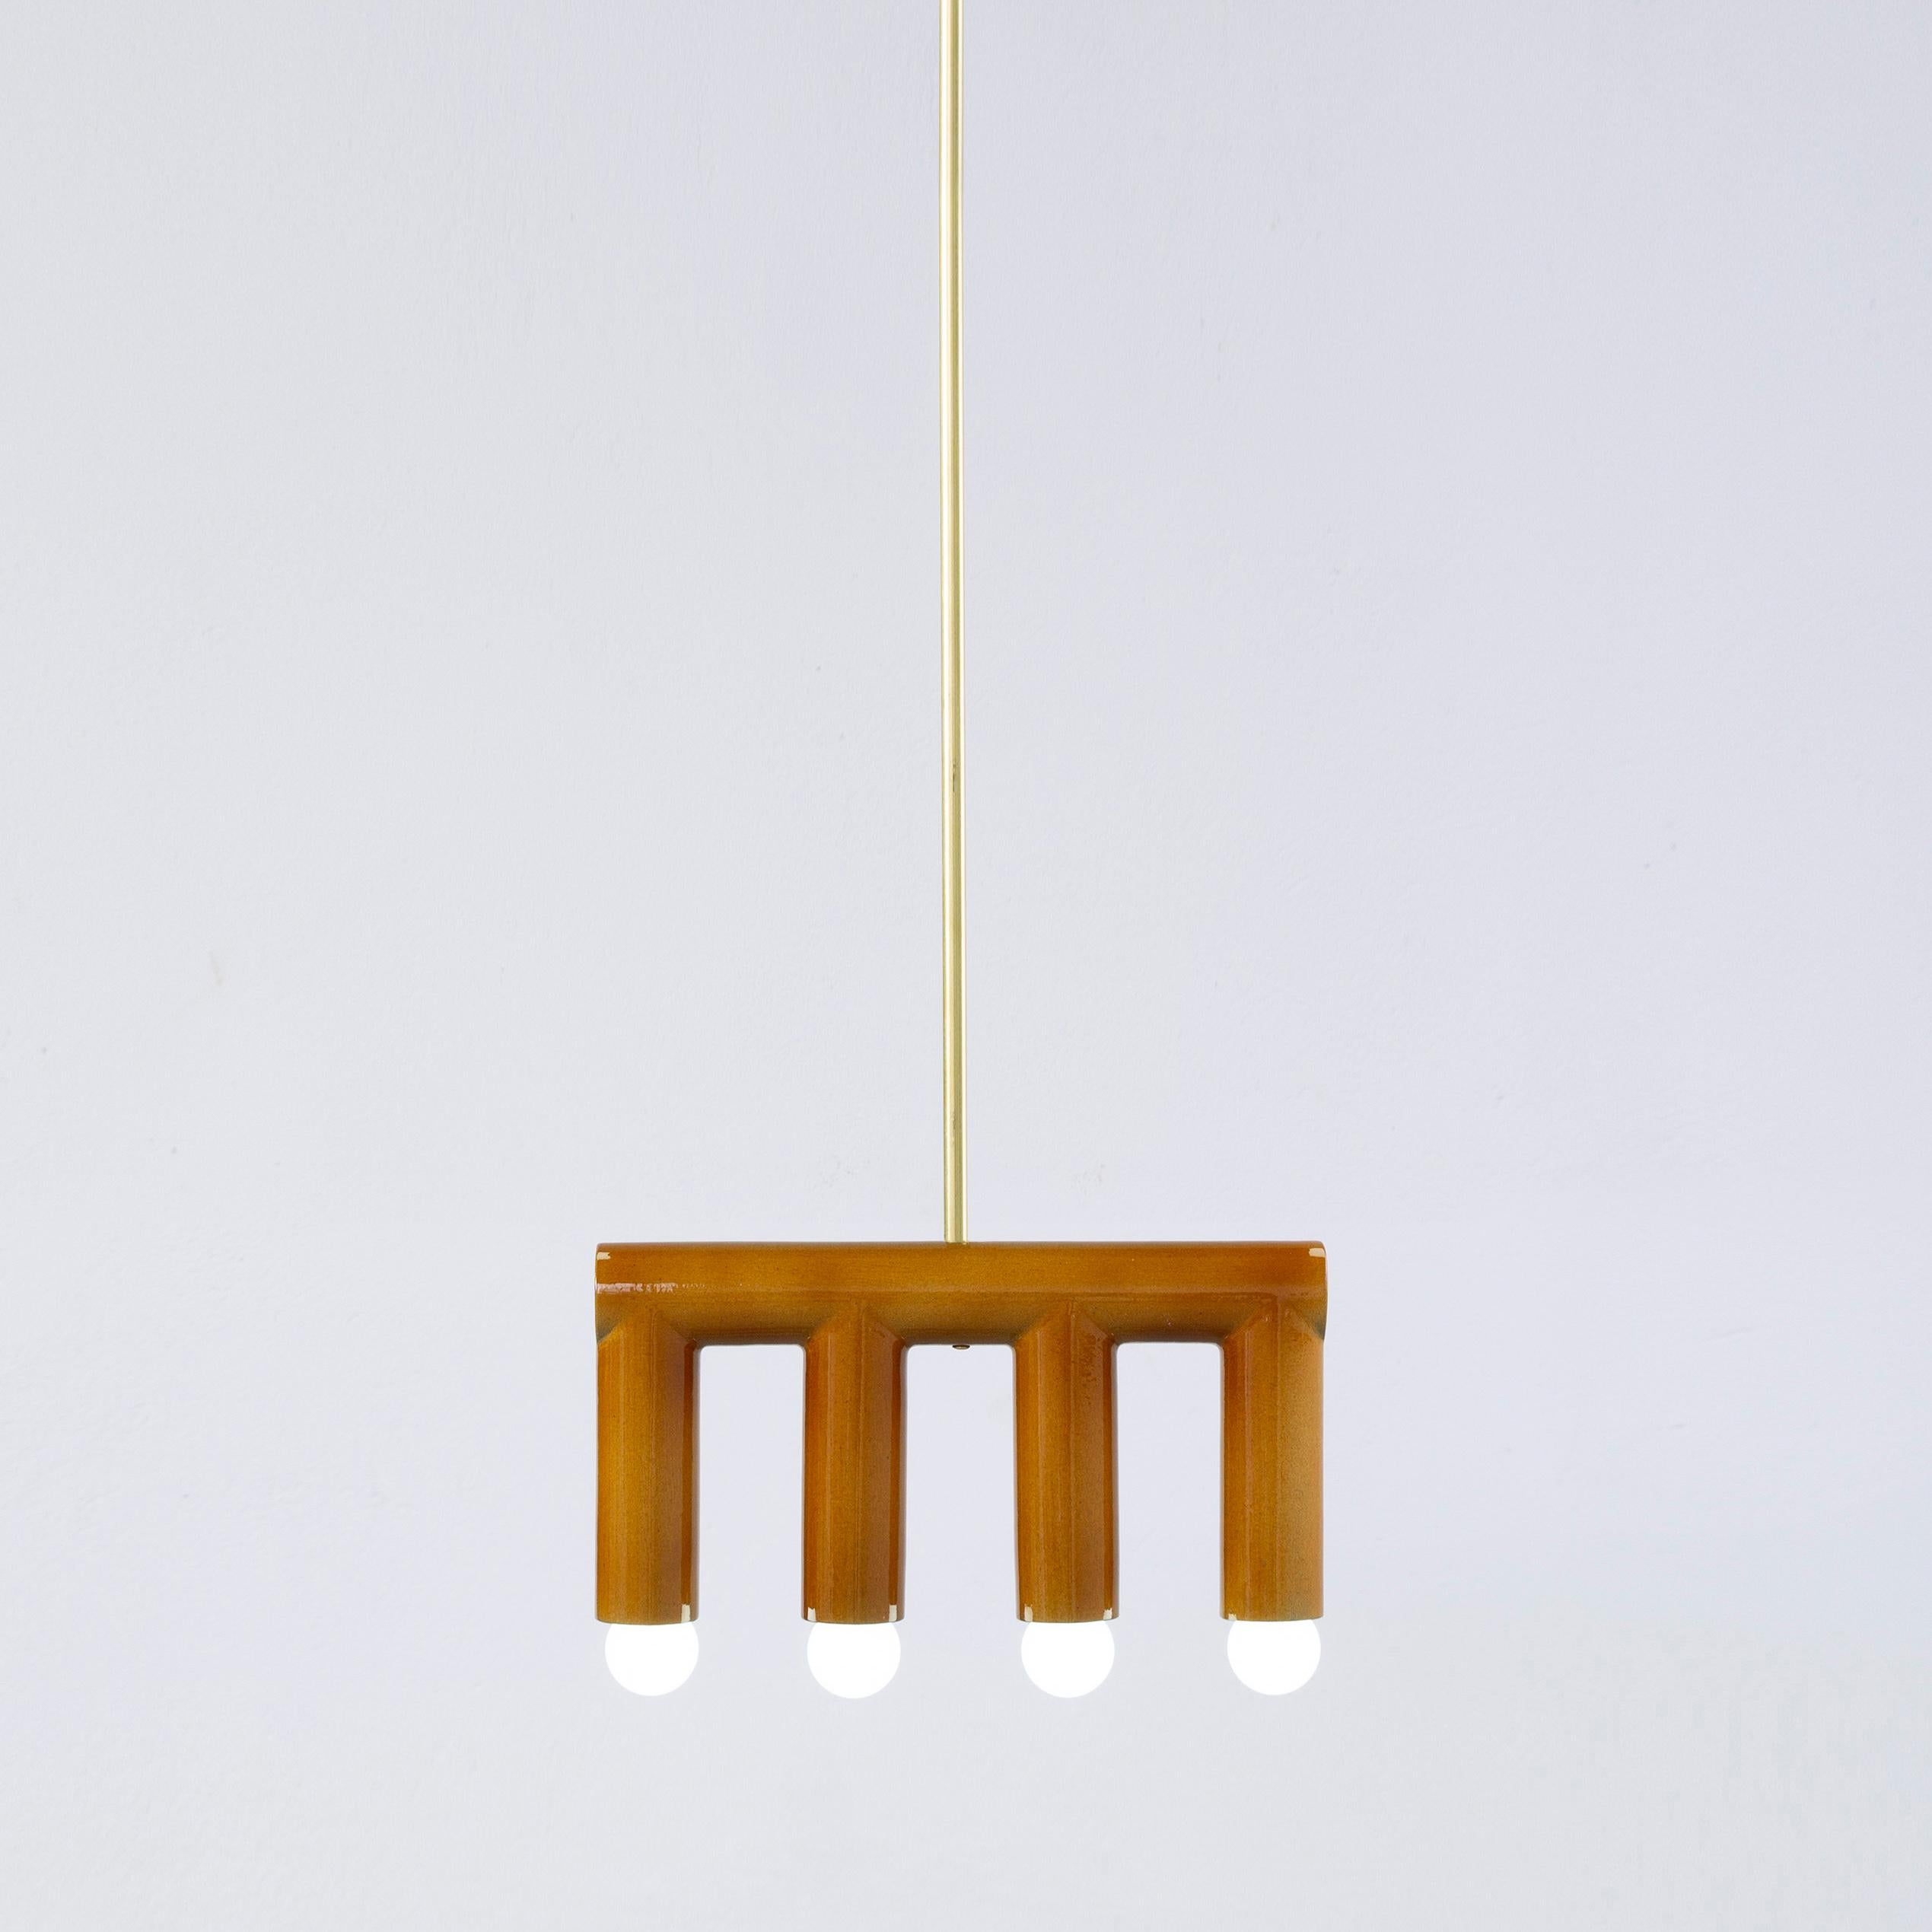 Ochre TRN B3 pendant lamp by Pani Jurek
Dimensions: D 5 x W 35 x H 18 cm 
Material: Hand glazed ceramic and brass.
Available in other colors.
Lamps from the TRN collection hang on a metal tube, not on a cable. This allows the lamp to be mounted in a